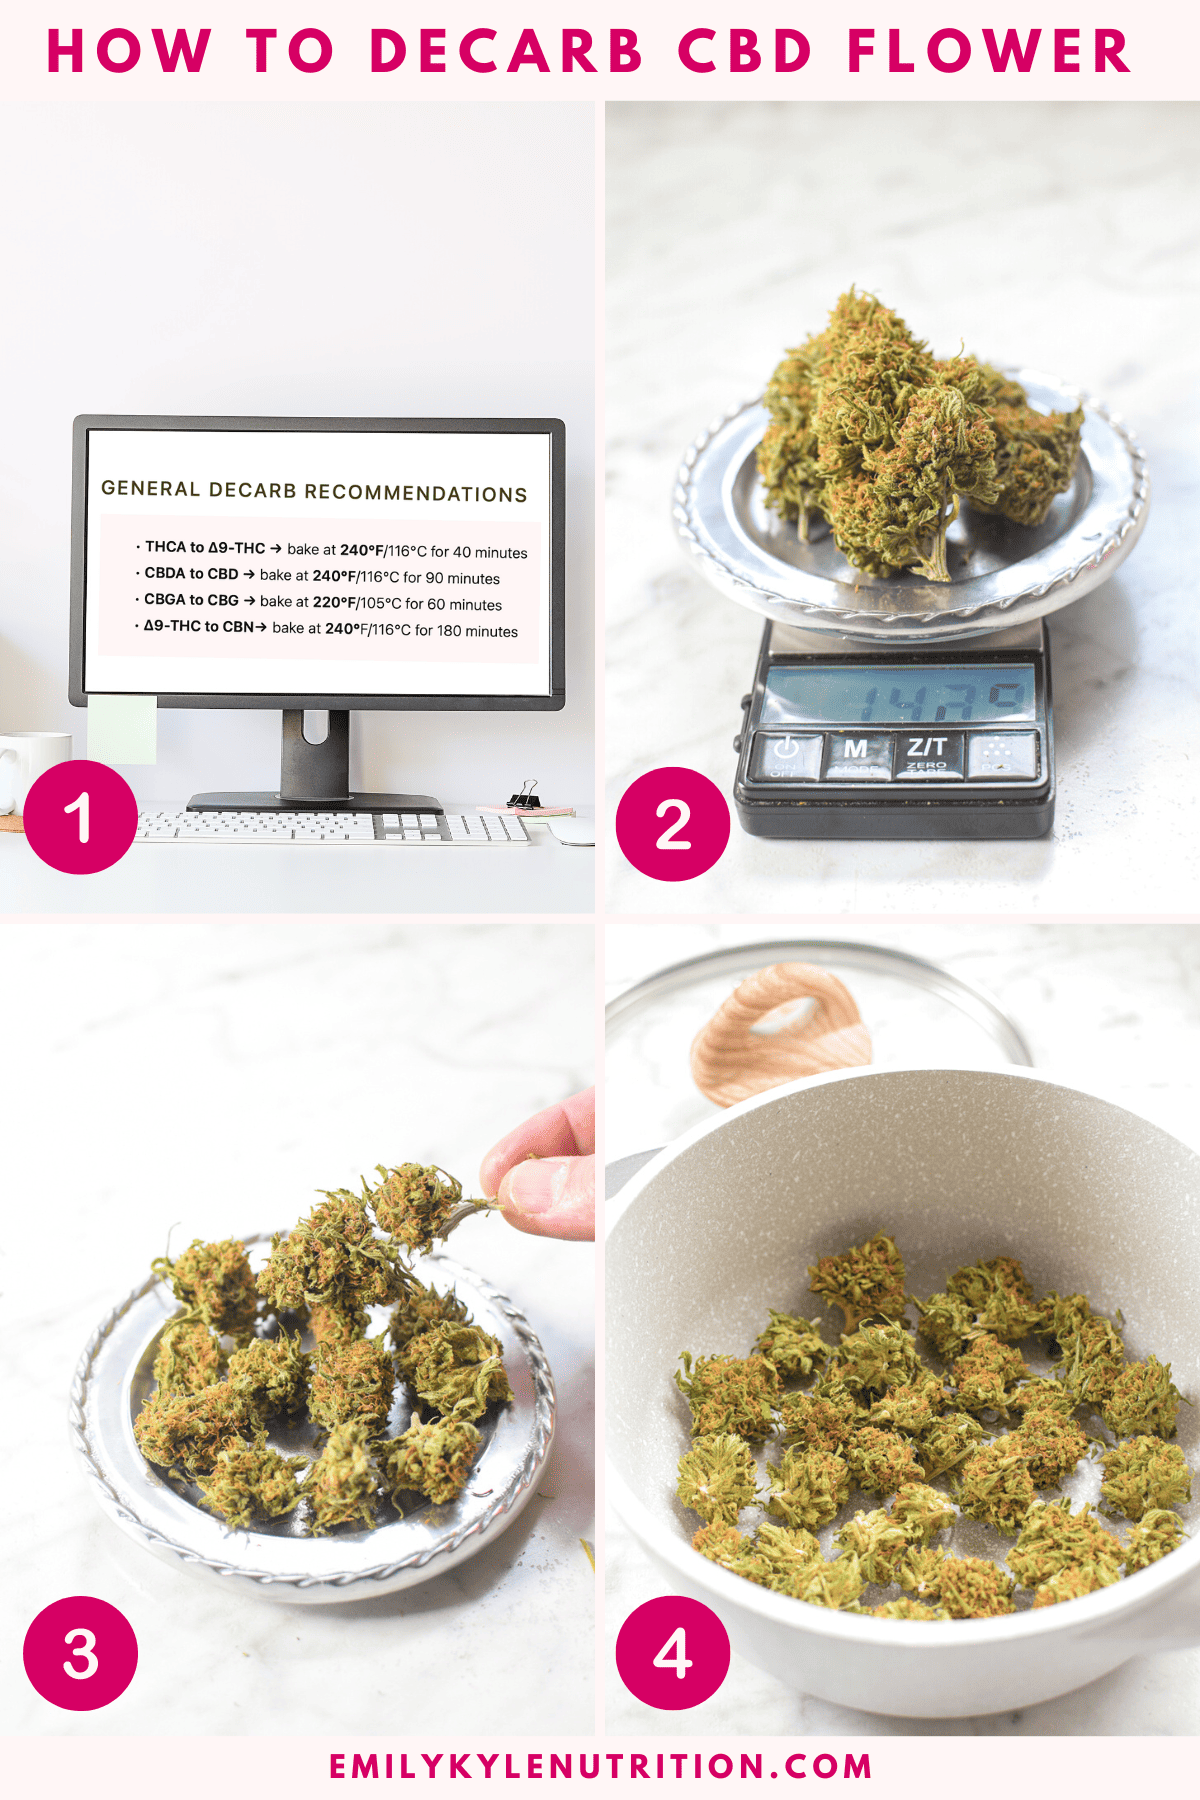 A four step image collage showing how to decarb cbd flower.